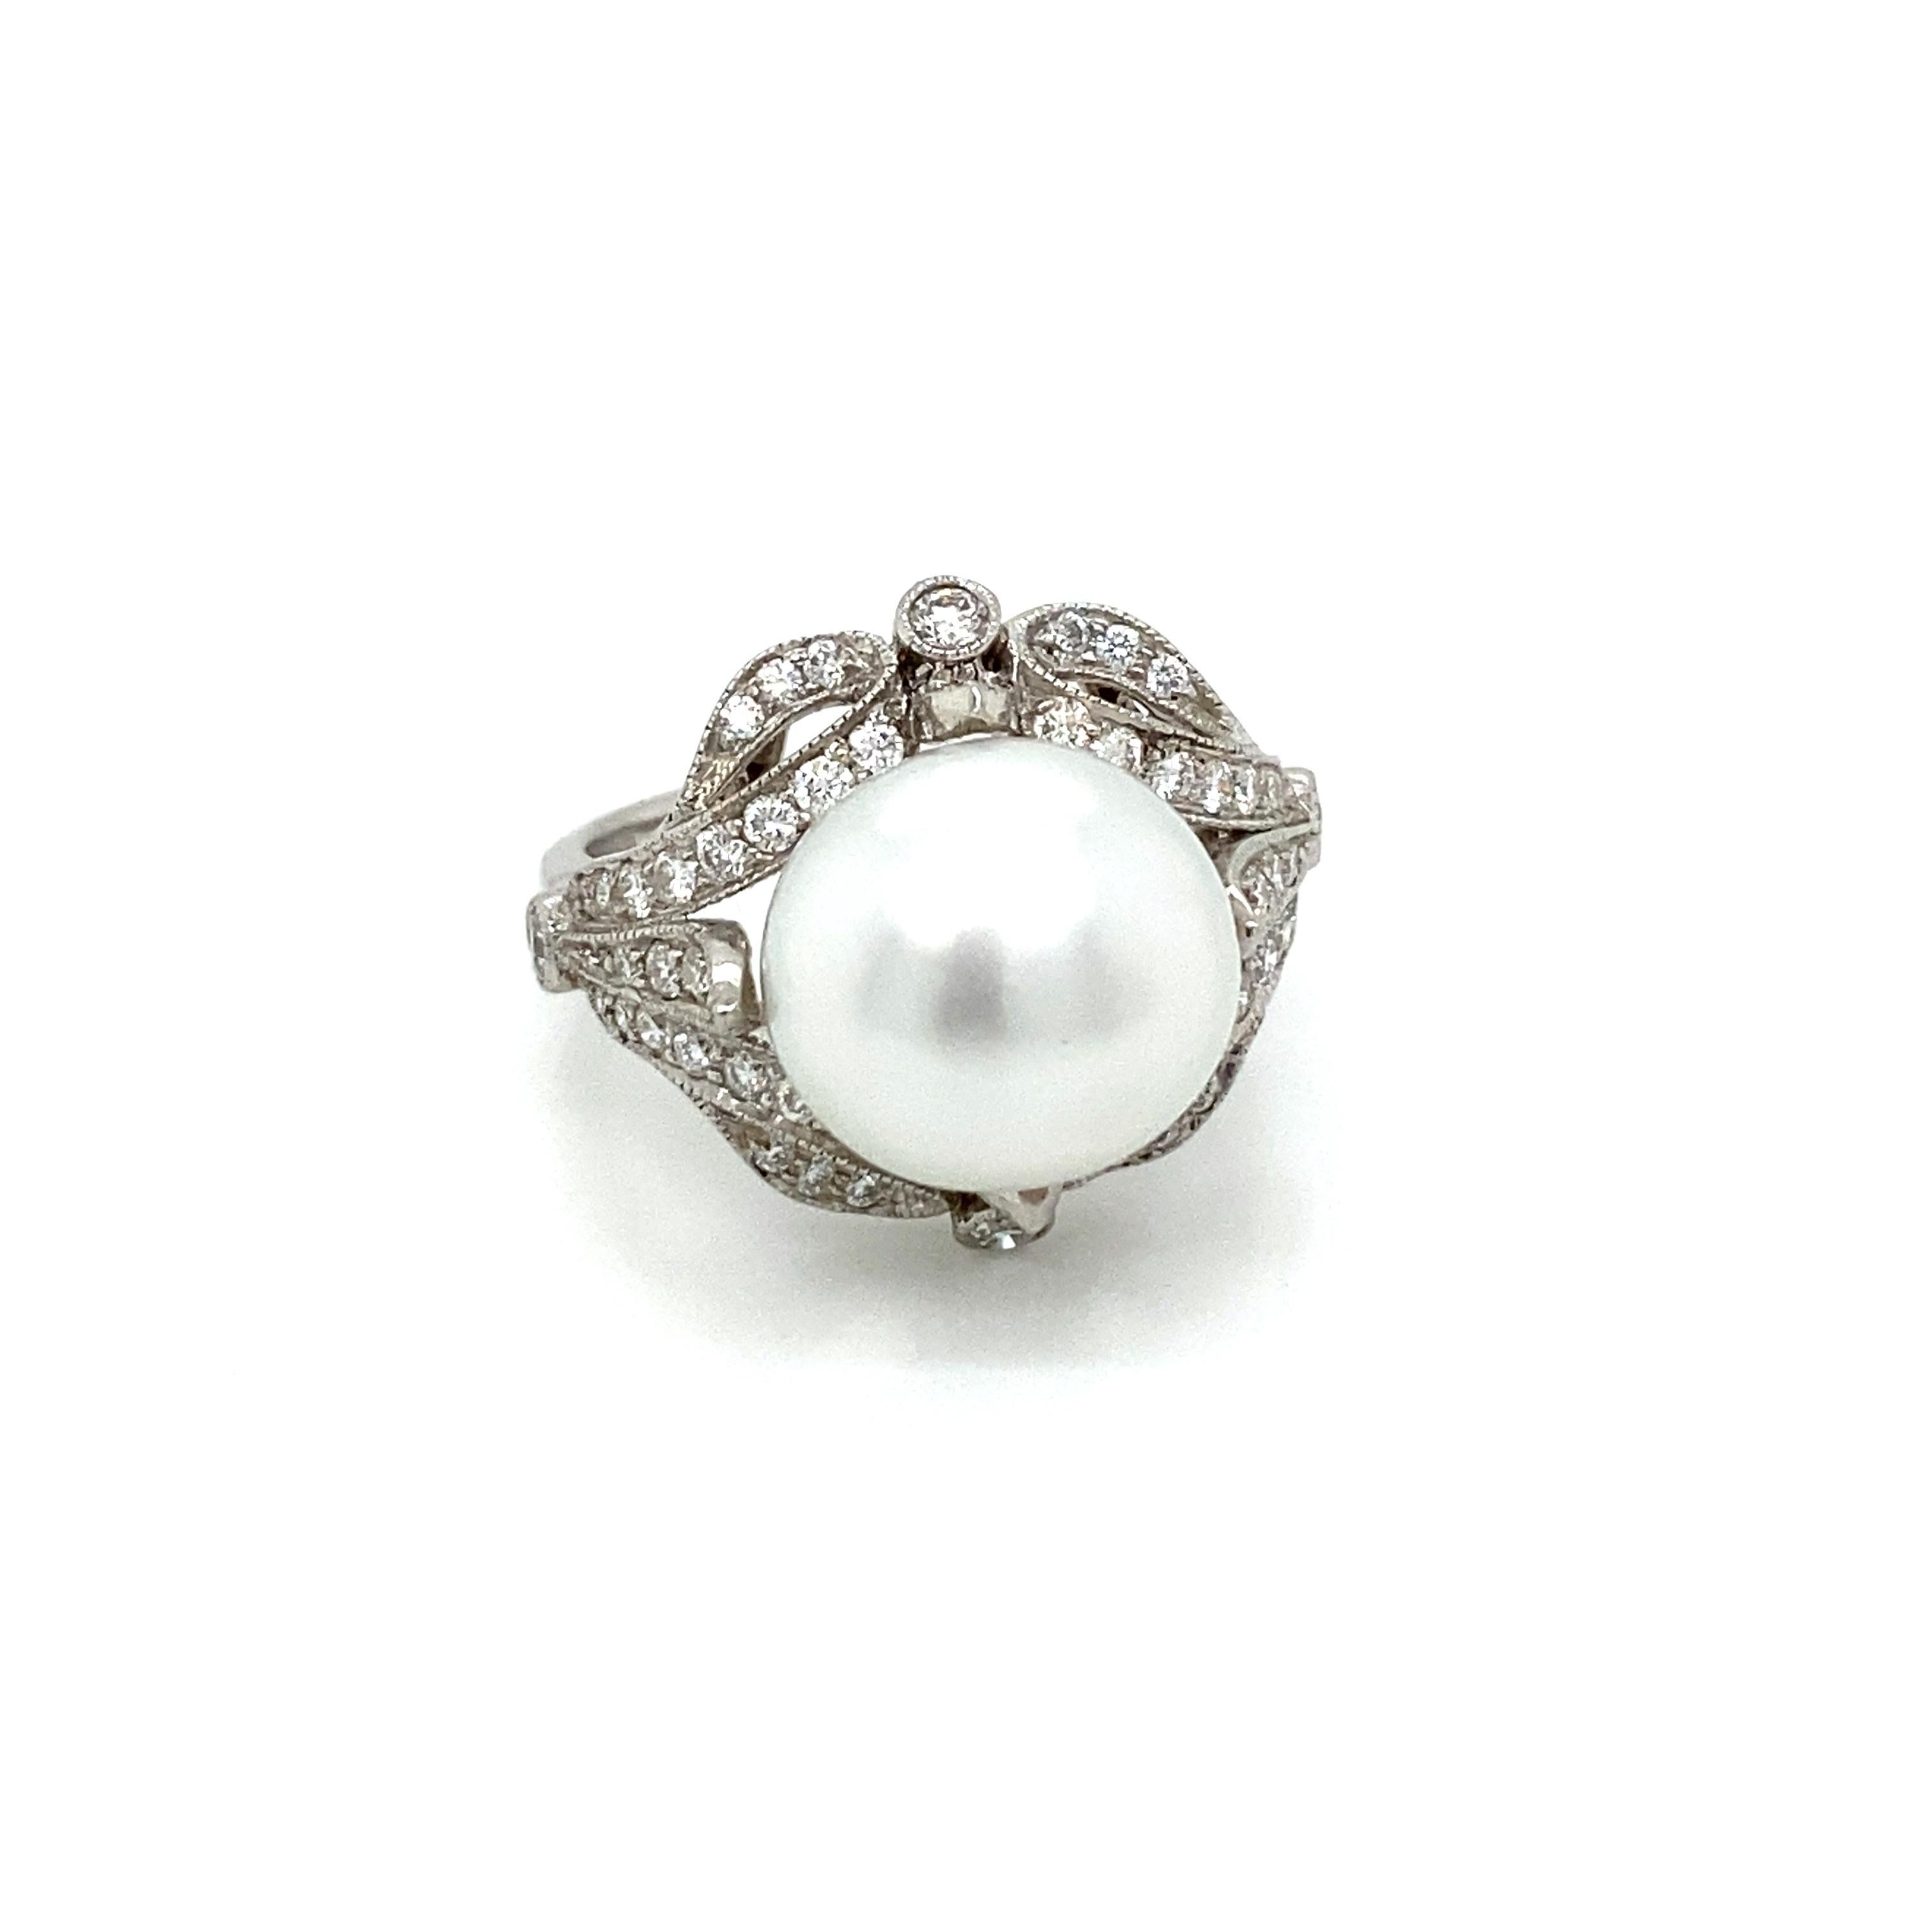 Stunning handcrafted Platinum ring, authentic from 1930', origin France.

It is set in the center with a large and beautiful Keshi pearl and surrounded by approx. 1.10 carat of sparkling round brilliant cut diamonds graded G color Vvs

CONDITION: